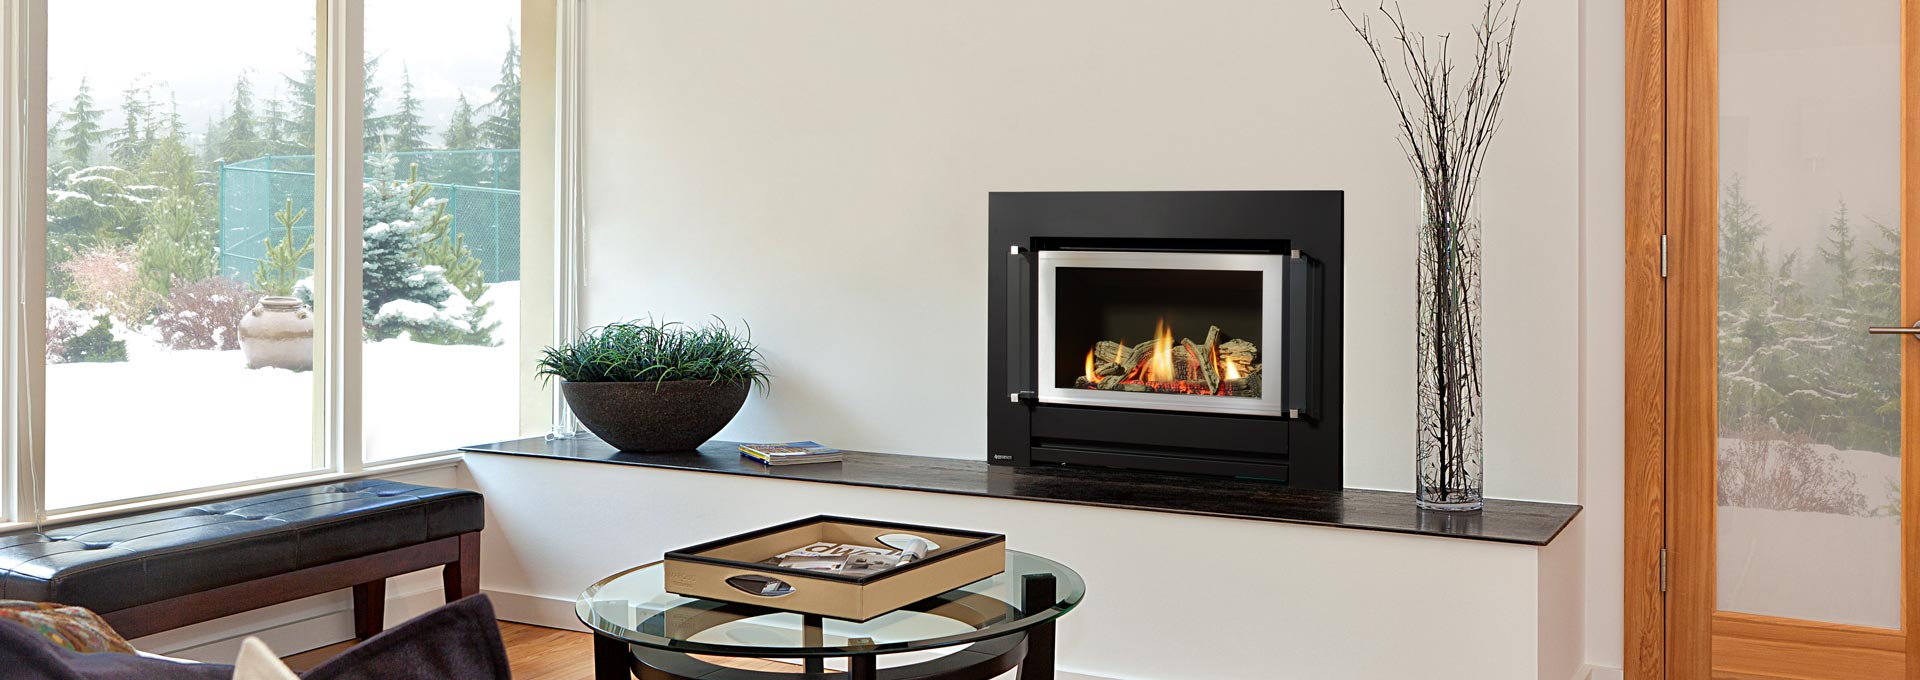 Picking the perfect fireplace for your home 